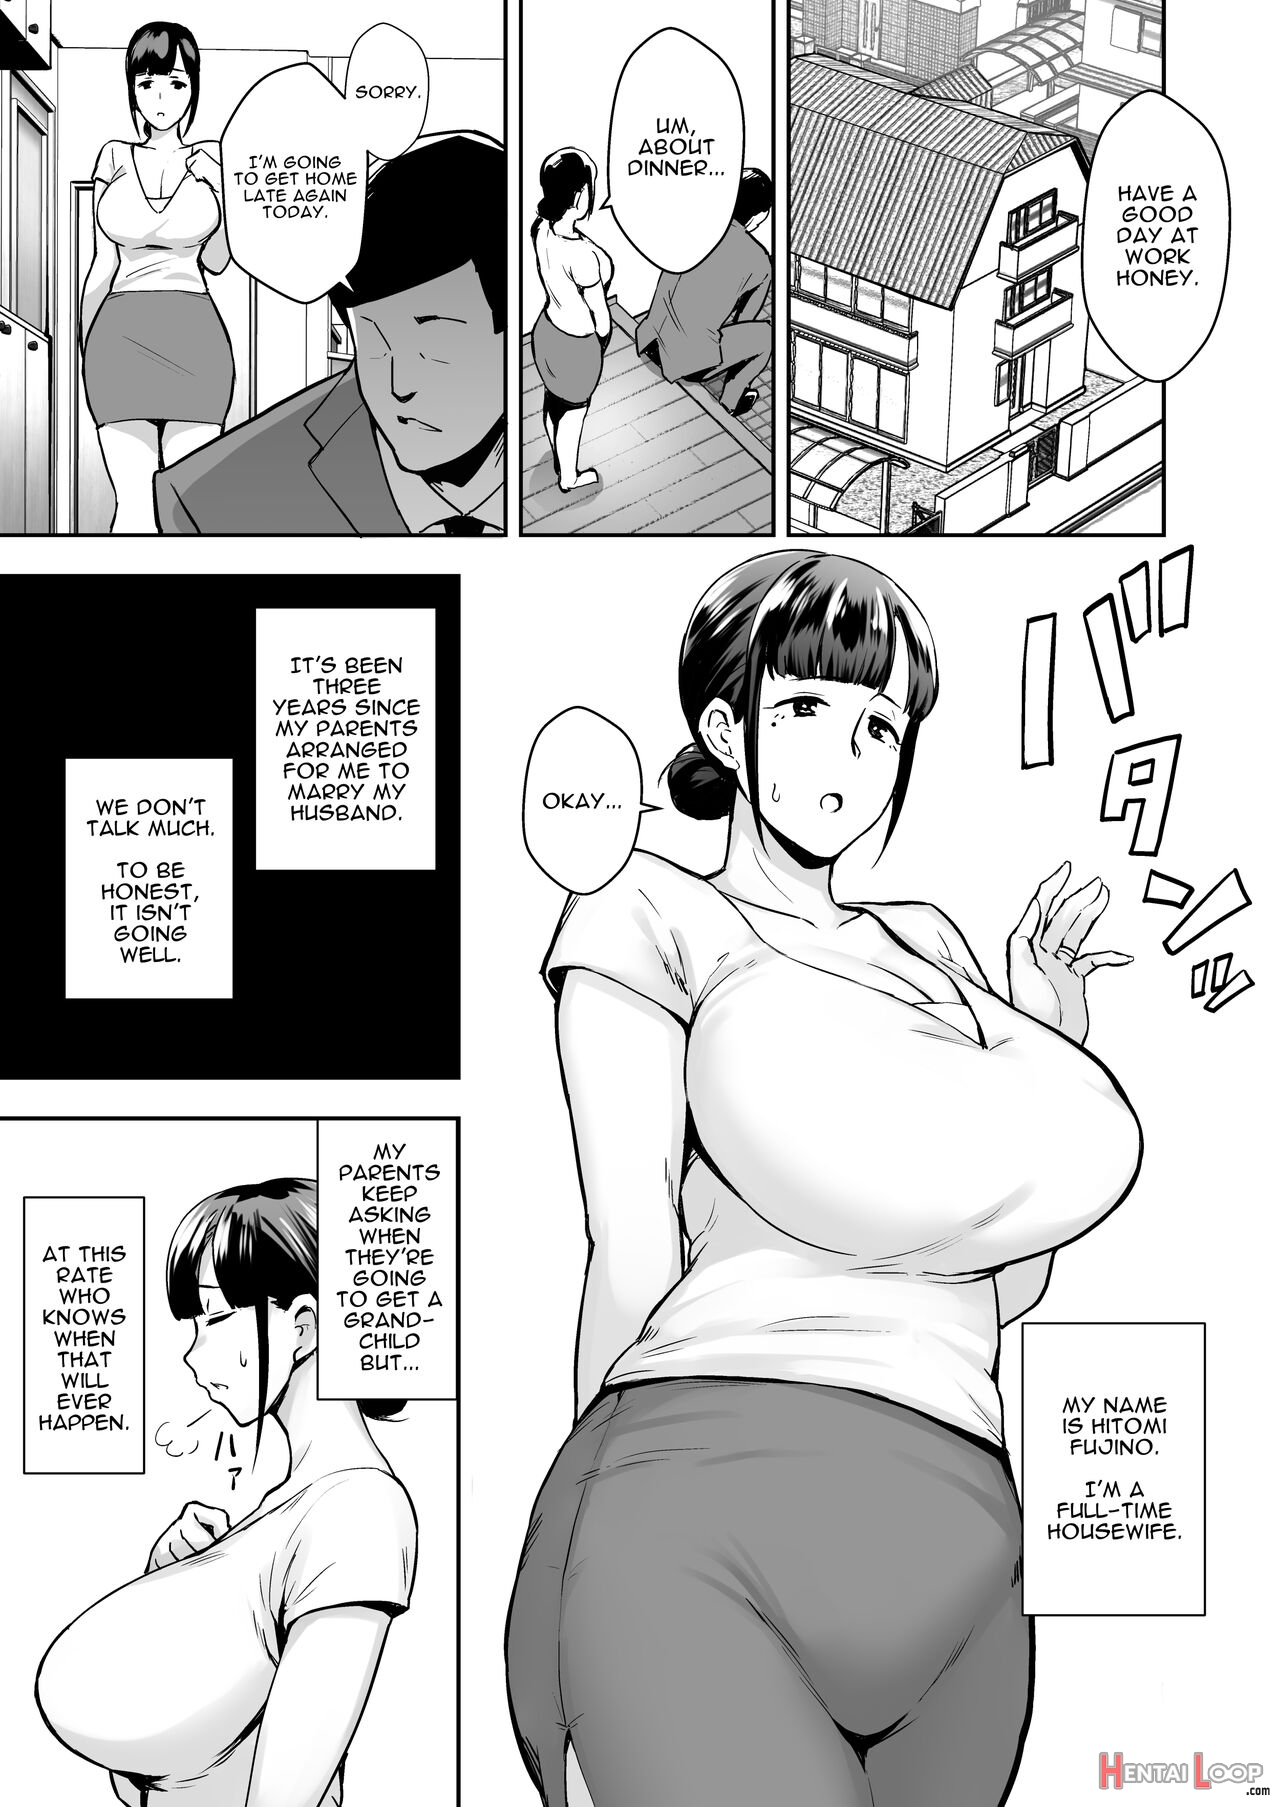 Housewife Ntr Stealing Hitomi - A Prim And Proper Housewife With Big Tits page 3